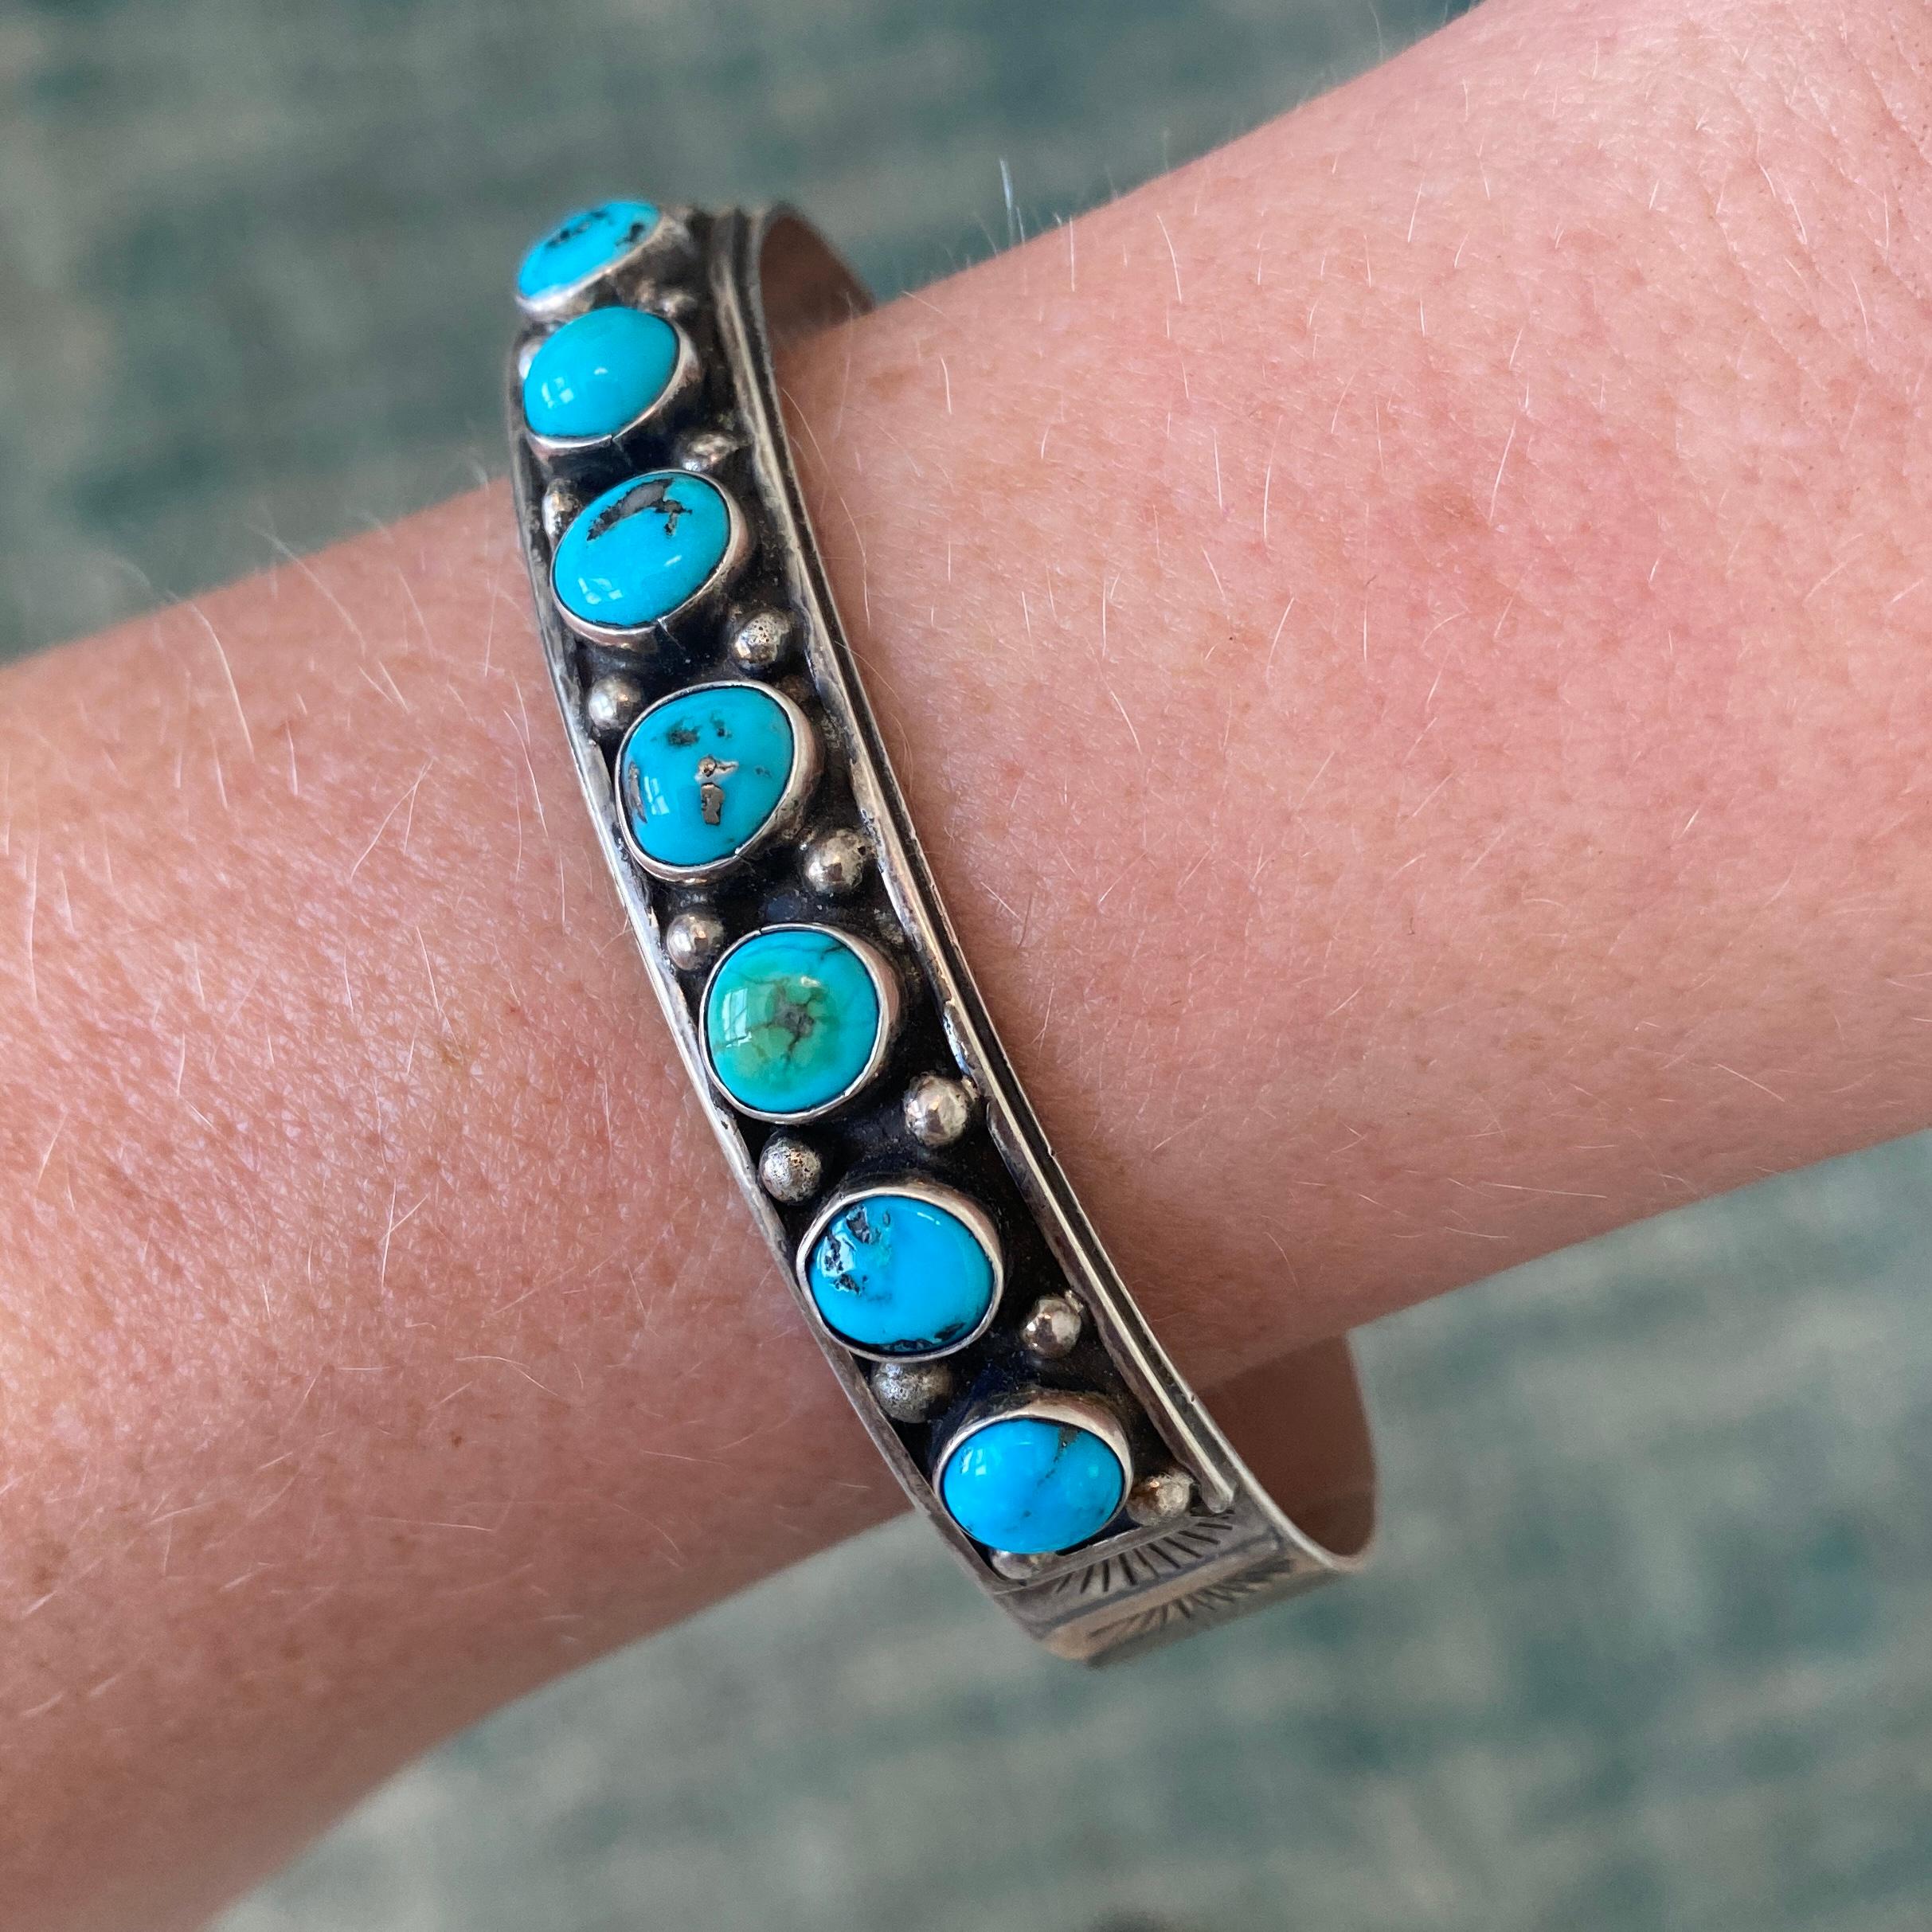 Vintage Navajo Kingman Bright Blue Round Turquoise, Stamped Sterling Silver Cuff Bracelet. Turquoise is stunning brighter blue color of excellent quality. No chips or cracks in turquoise, no missing stones. This piece is in very good condition for